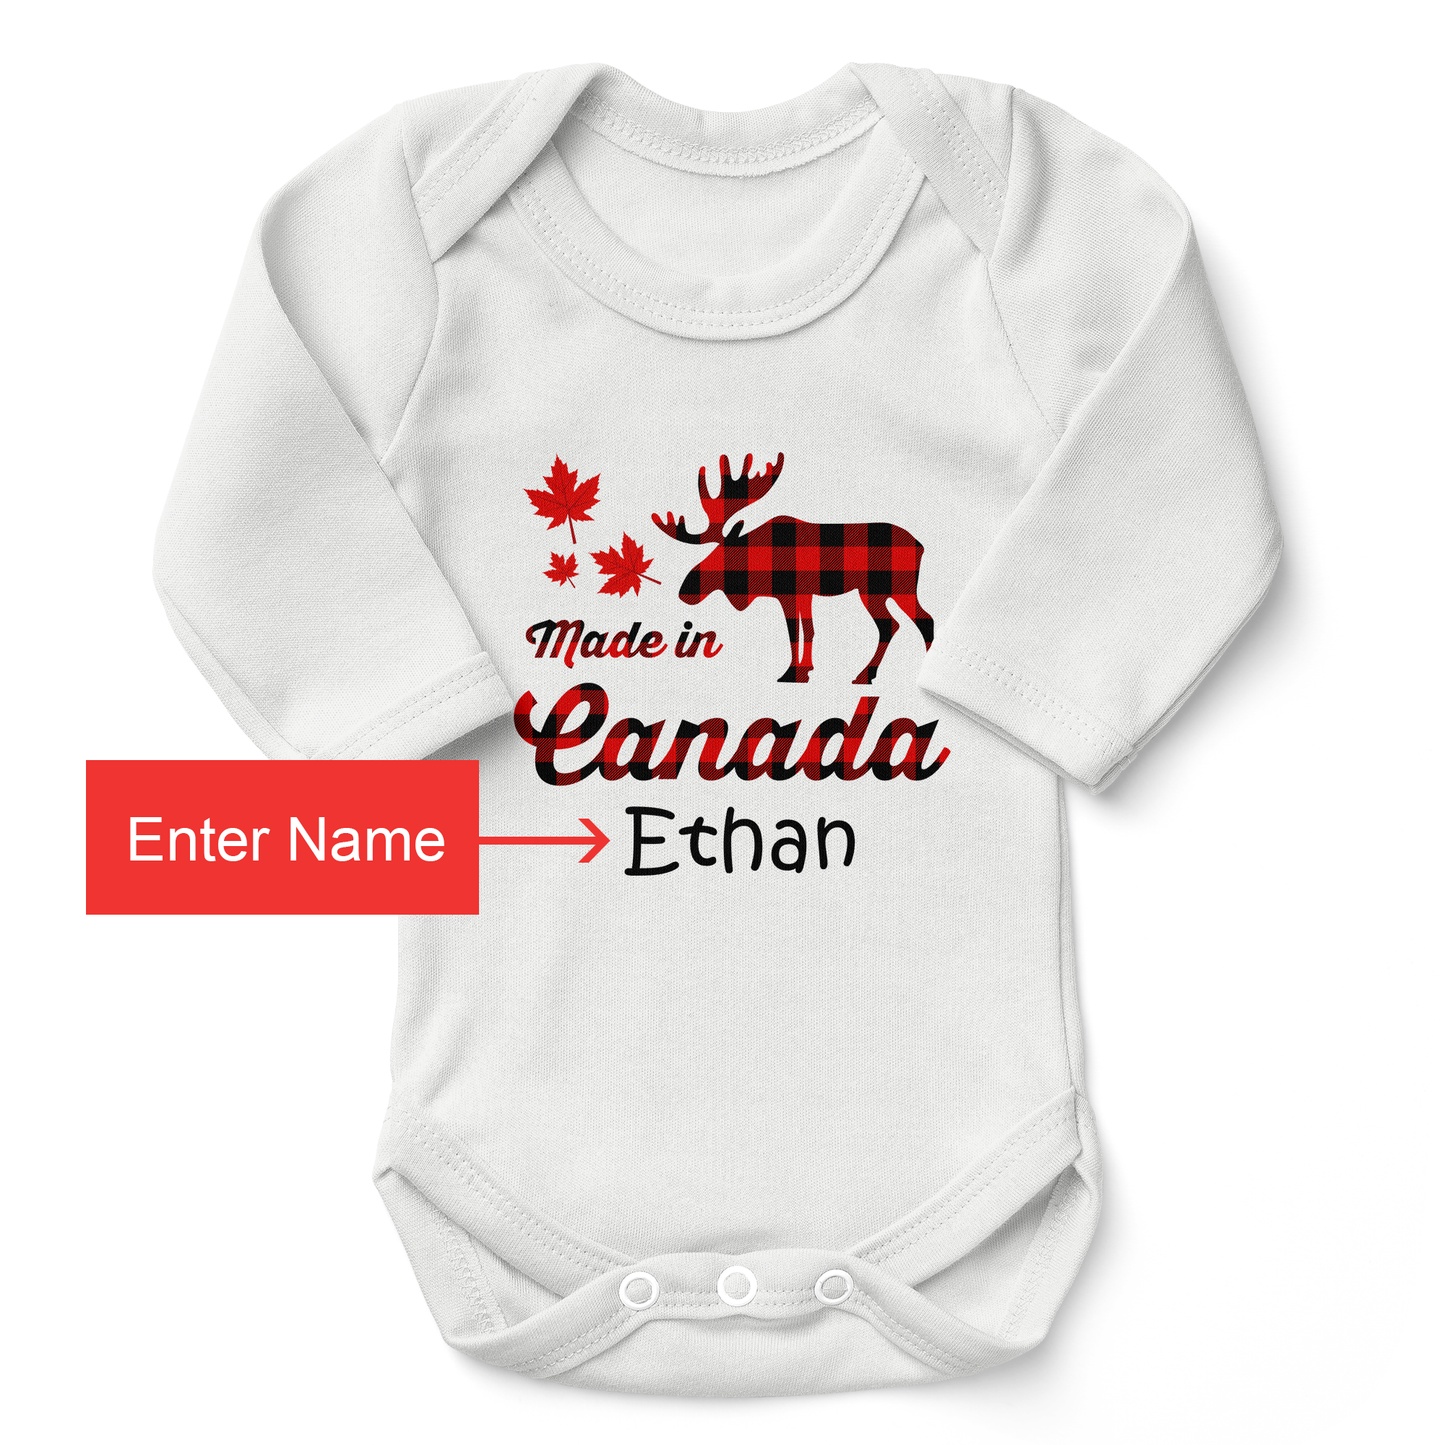 Personalized Organic Baby Bodysuit - Made In Canada (White / Long Sleeve)